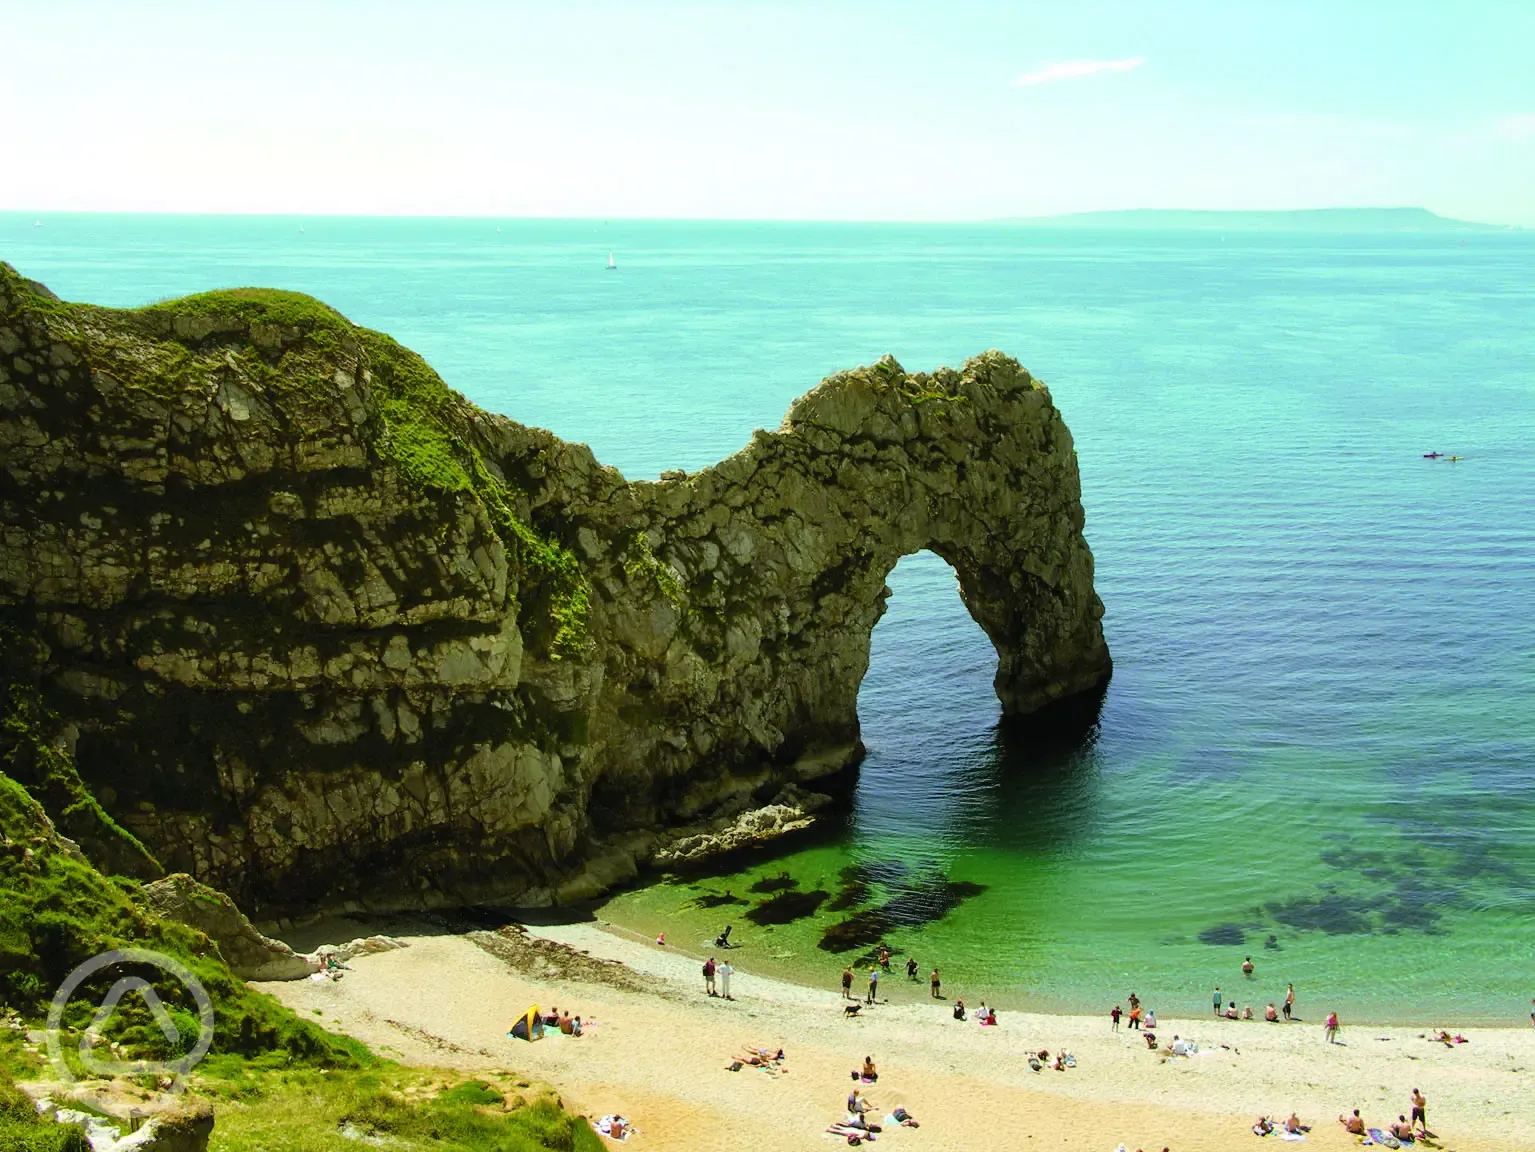 We are just an hour from the Jurassic Coast, with its fascinating coastline and sandy coves